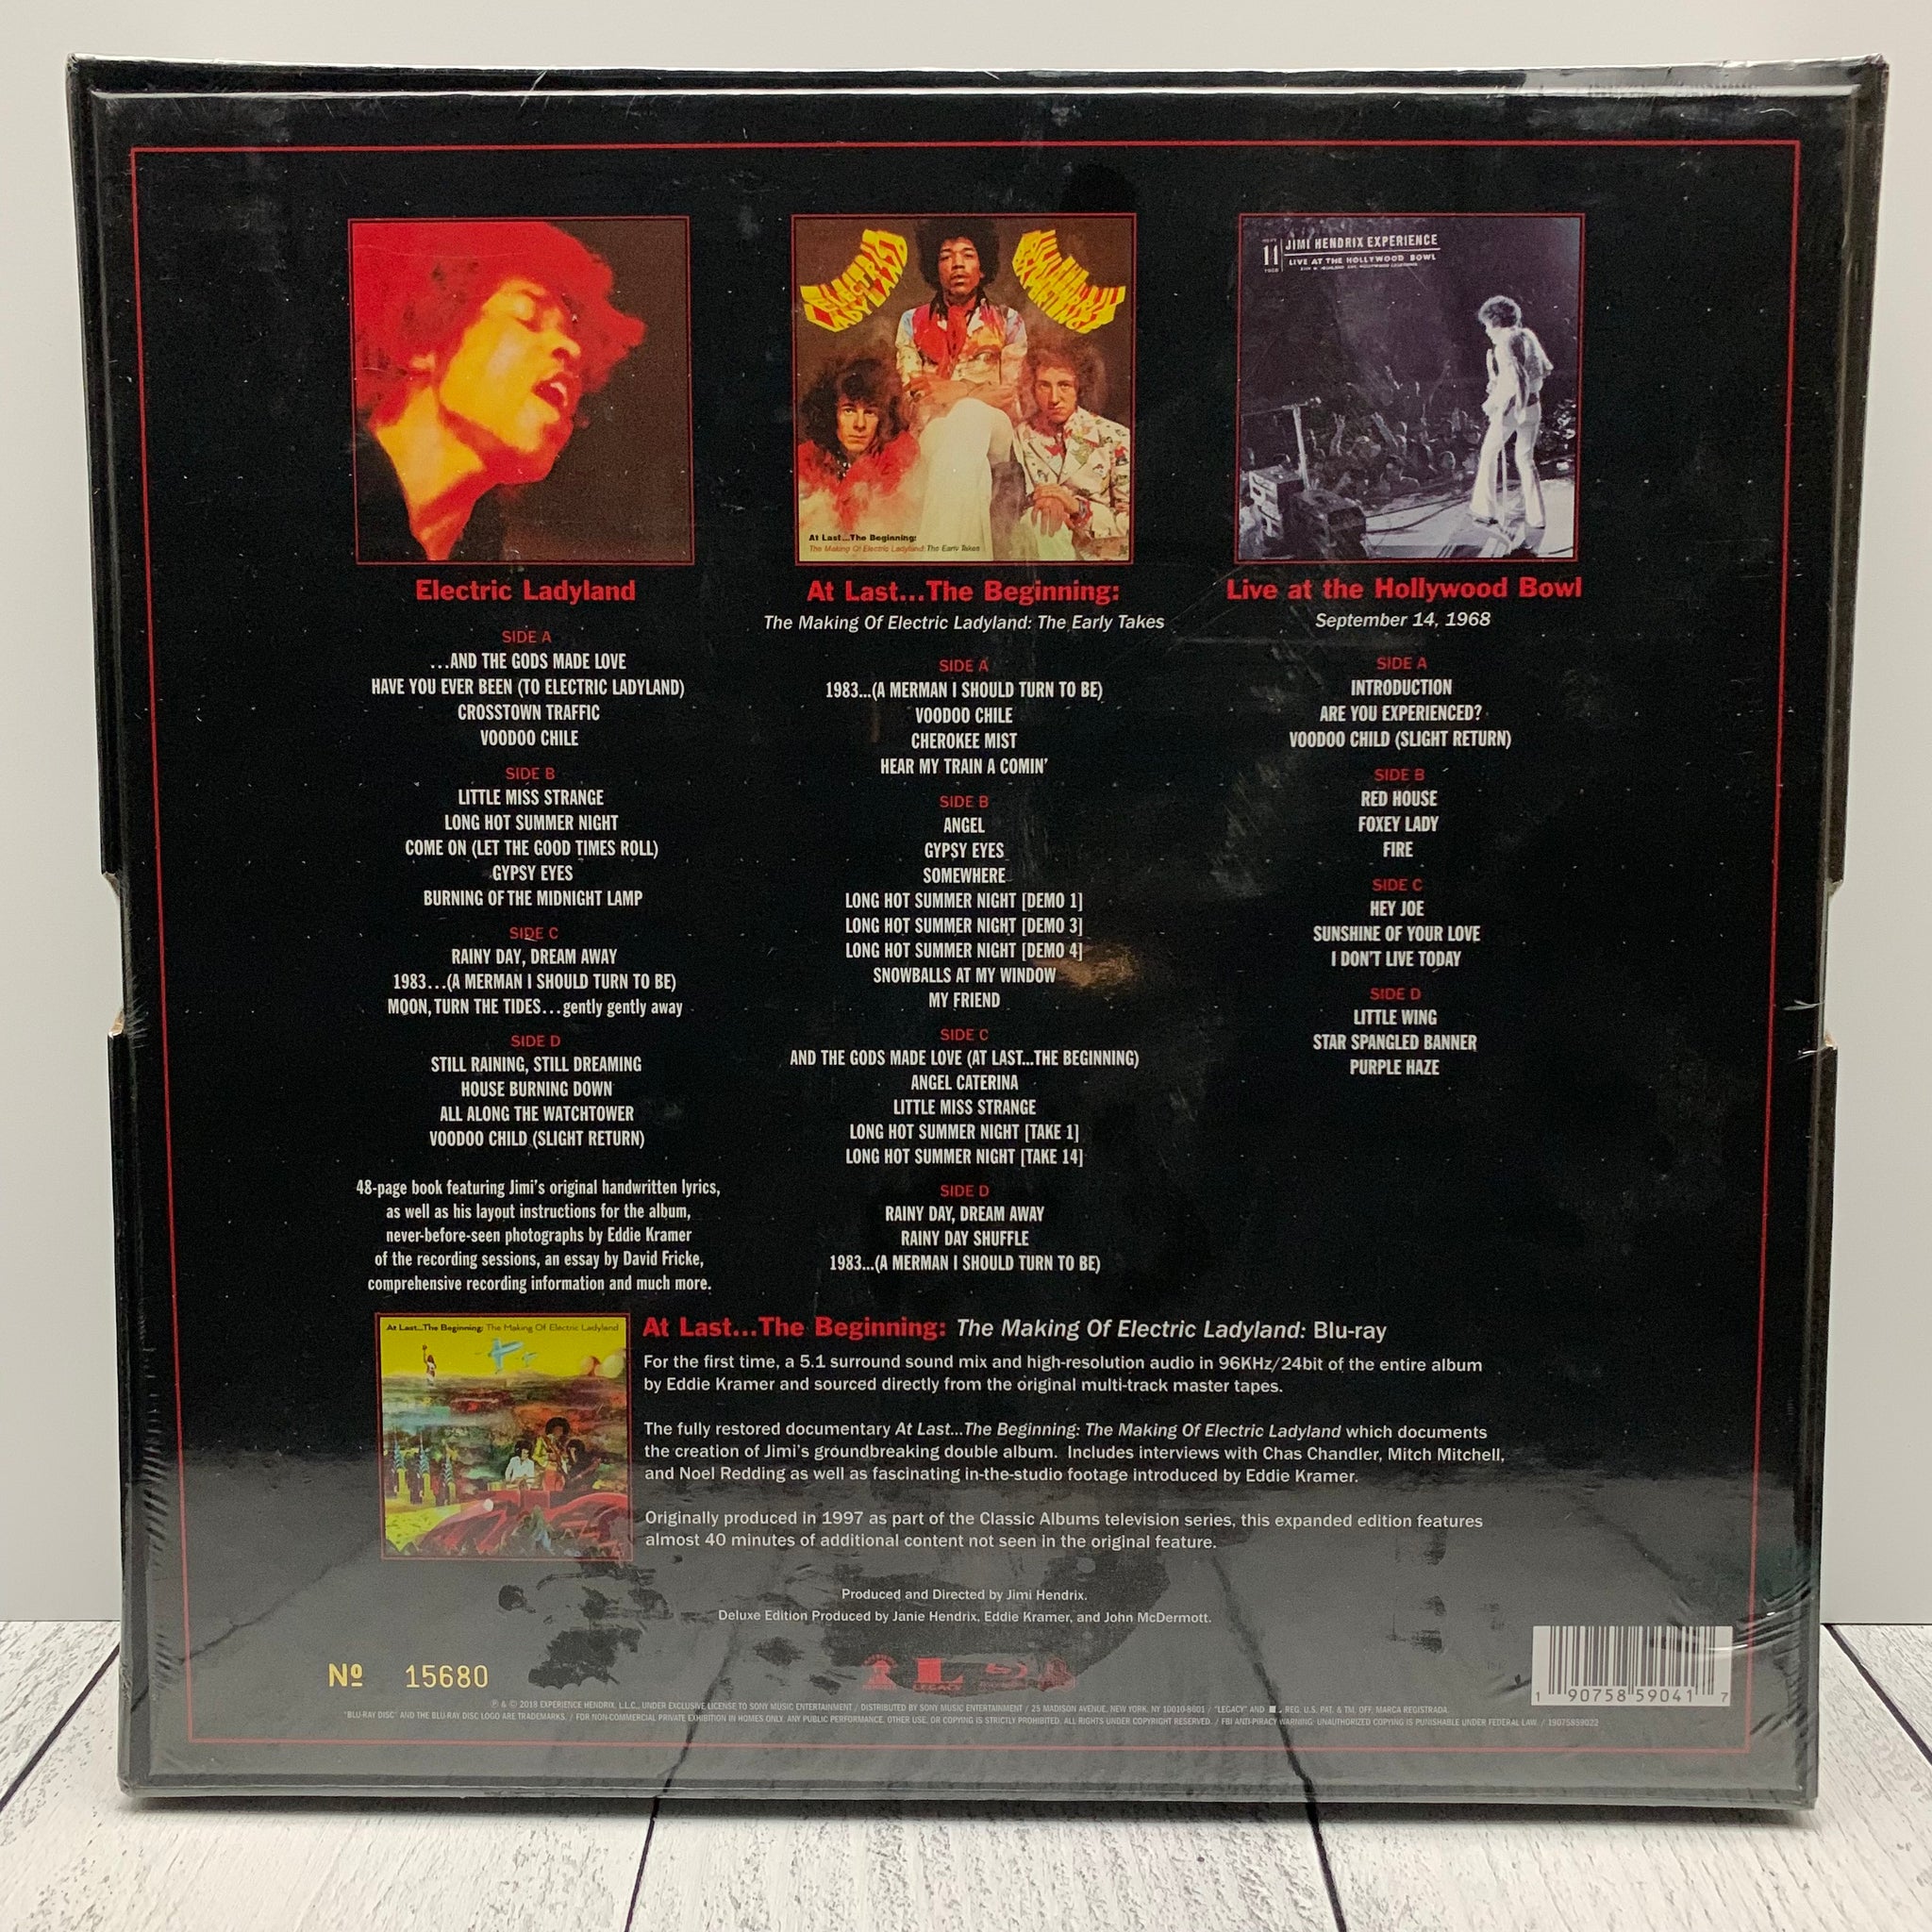 The Jimi Hendrix Experience - Electric Ladyland 6LP/1 Blu-ray Box Set (Numbered)